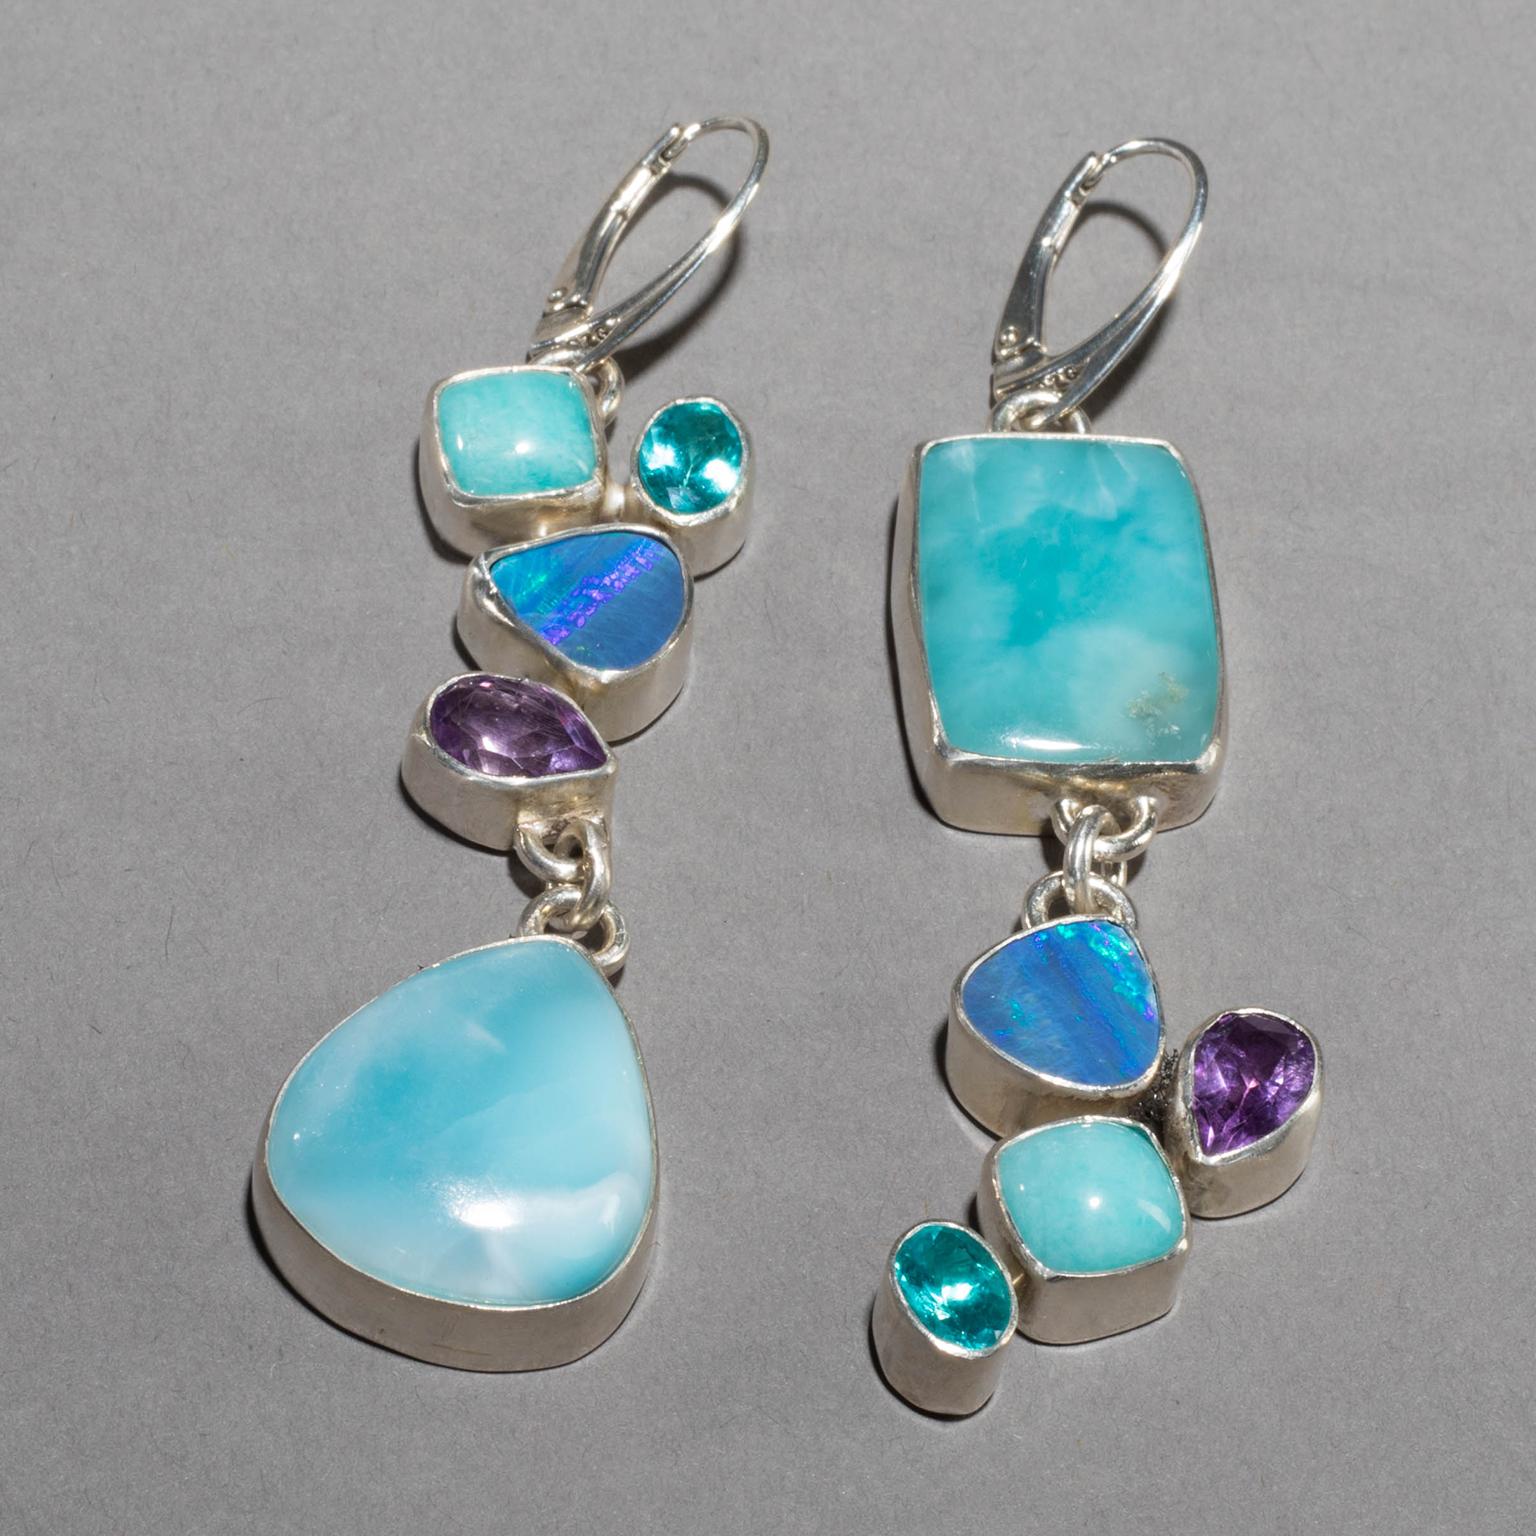 Studio Greytak 'Larimar Earrings on Amethyst' With Opal and Apitite For Sale 5